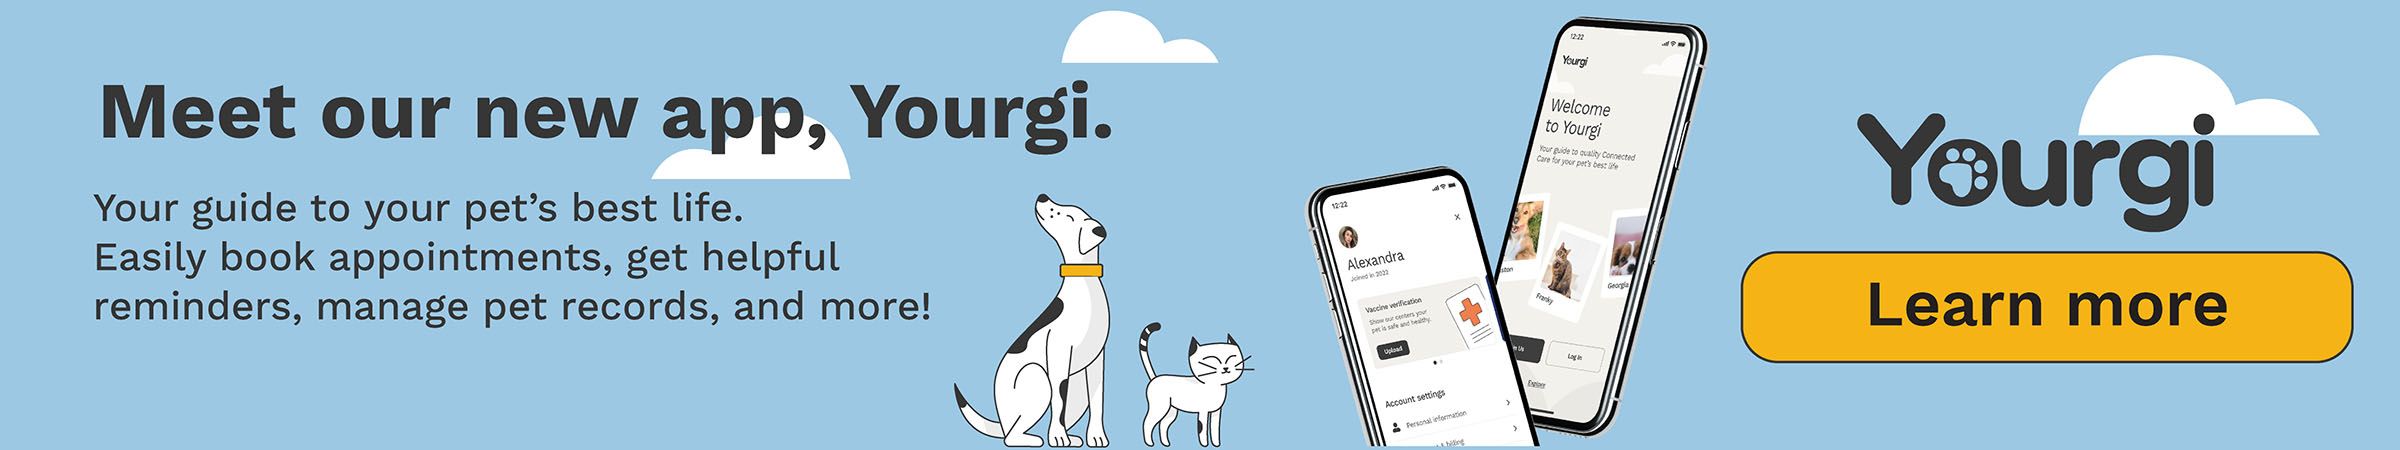 Meet our yourgi app banner